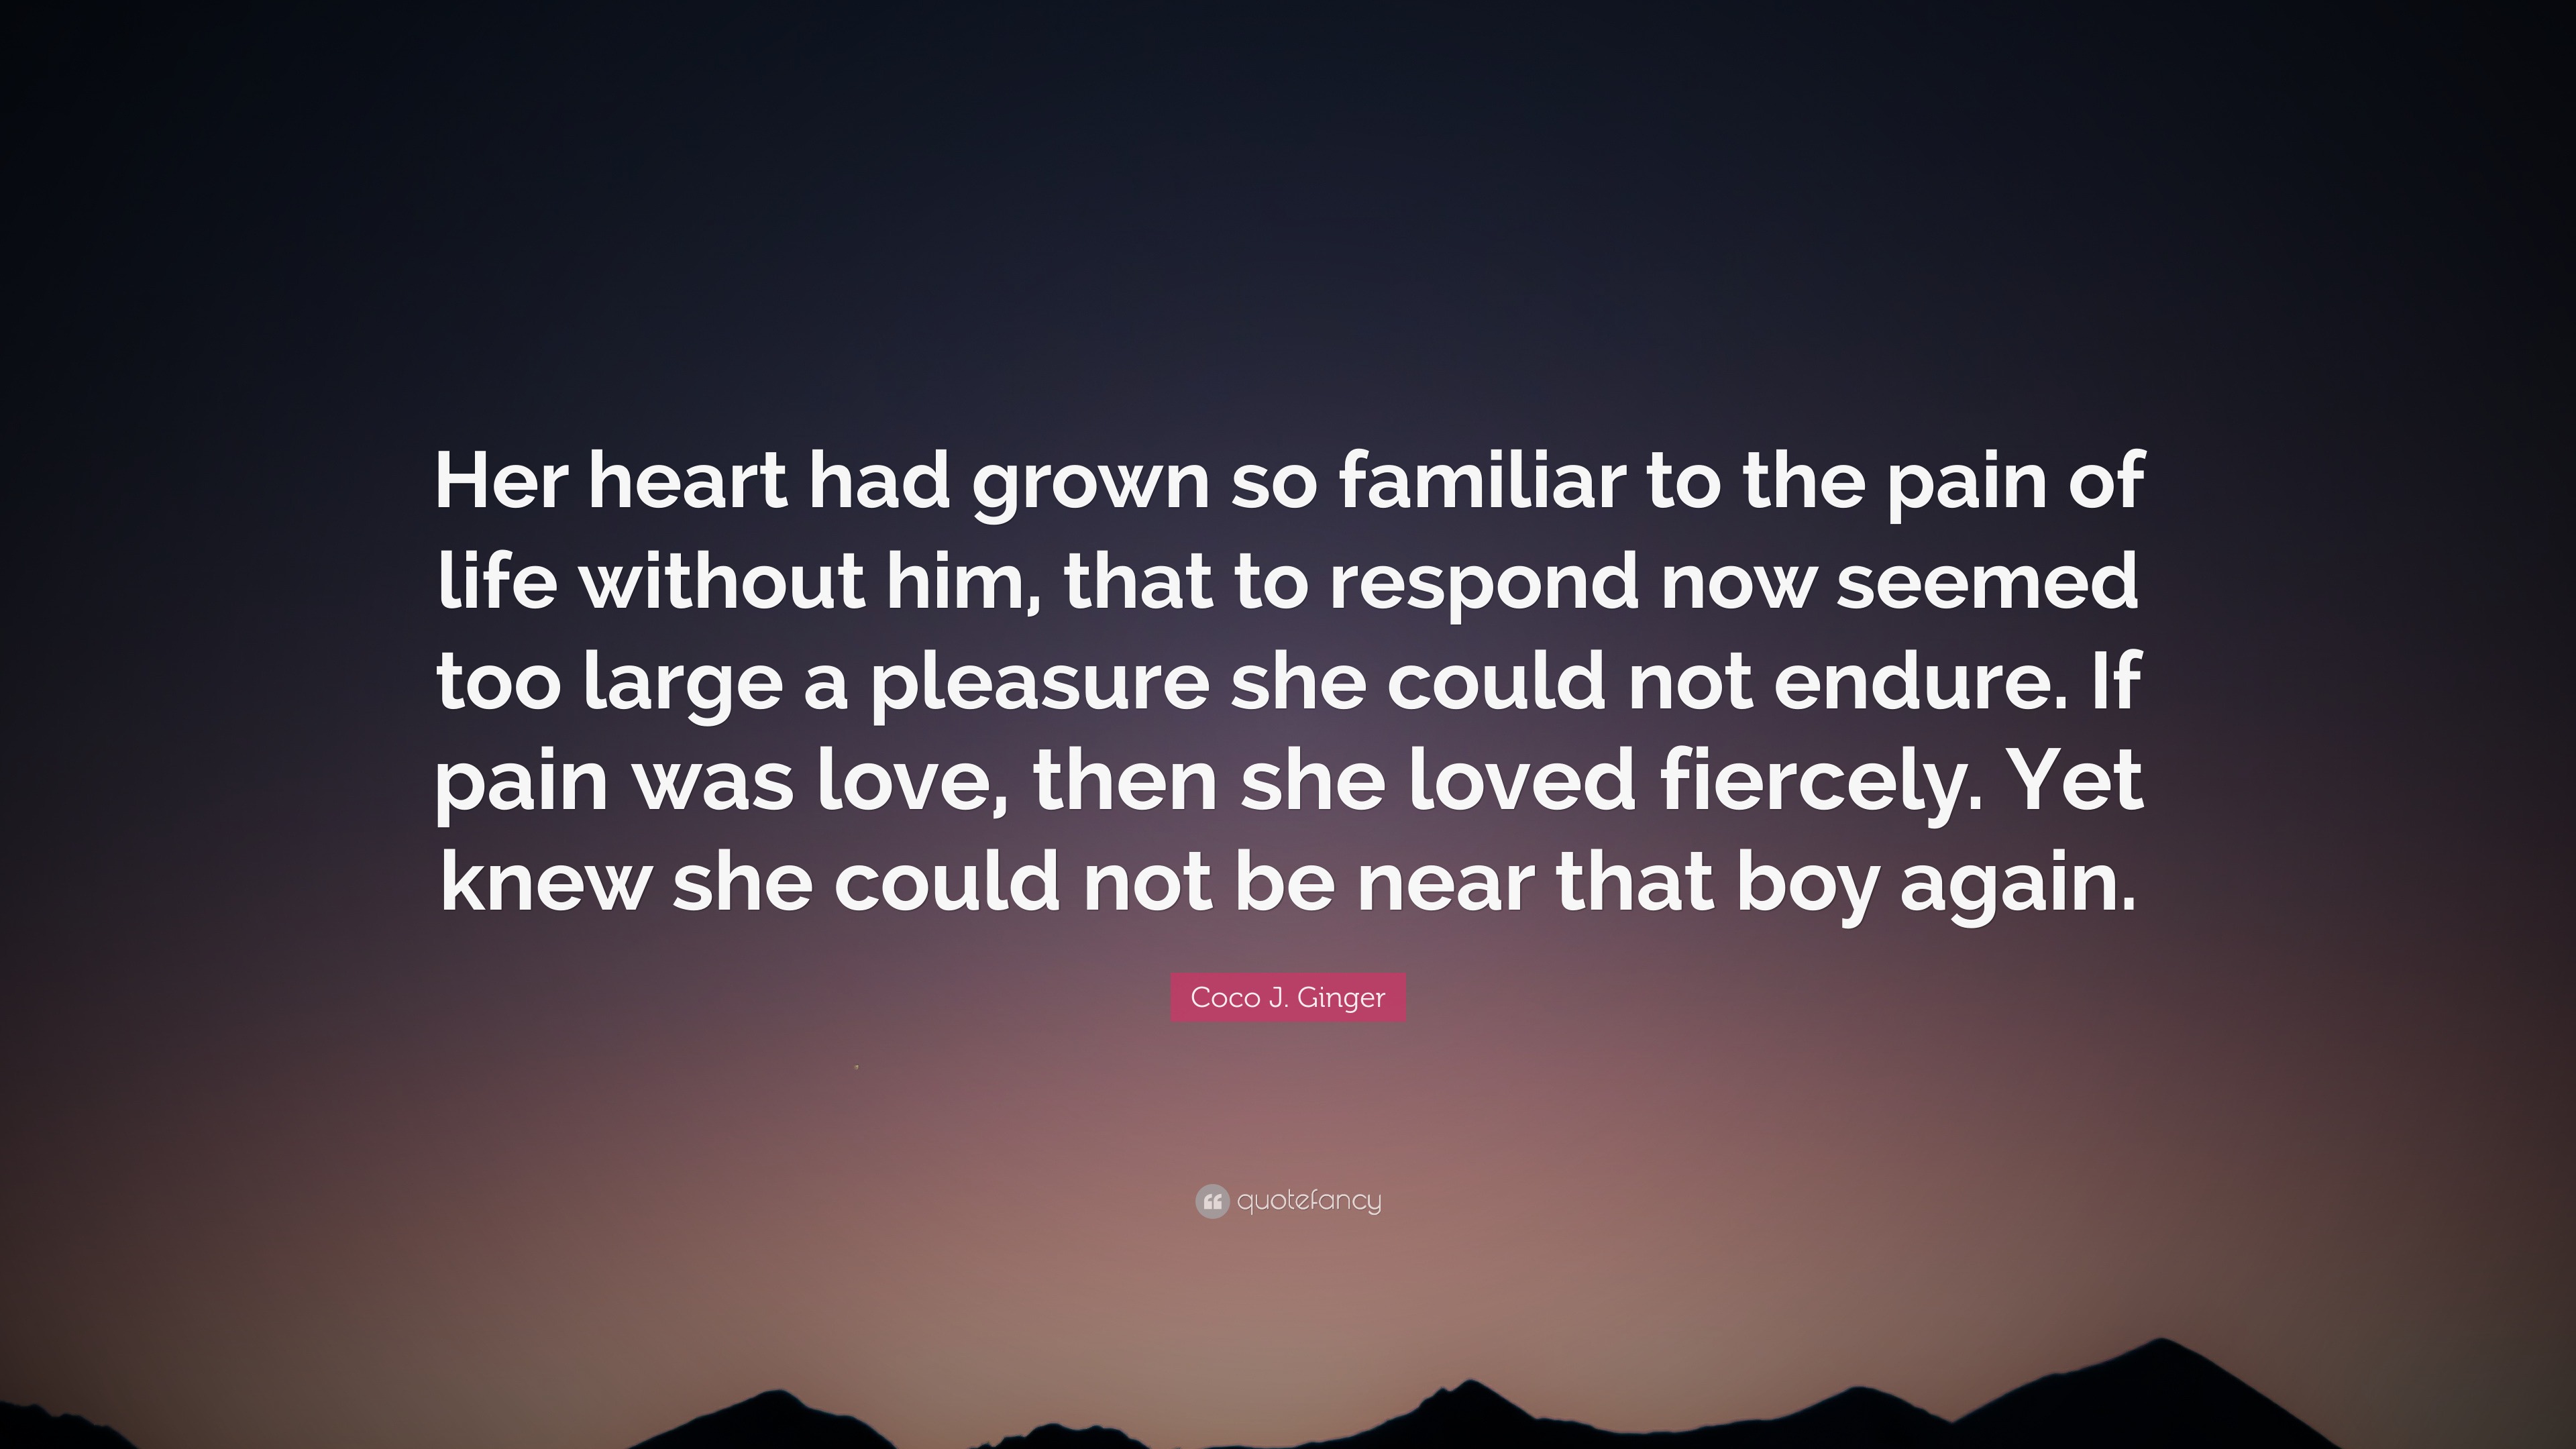 Coco J Ginger Quote “Her heart had grown so familiar to the pain